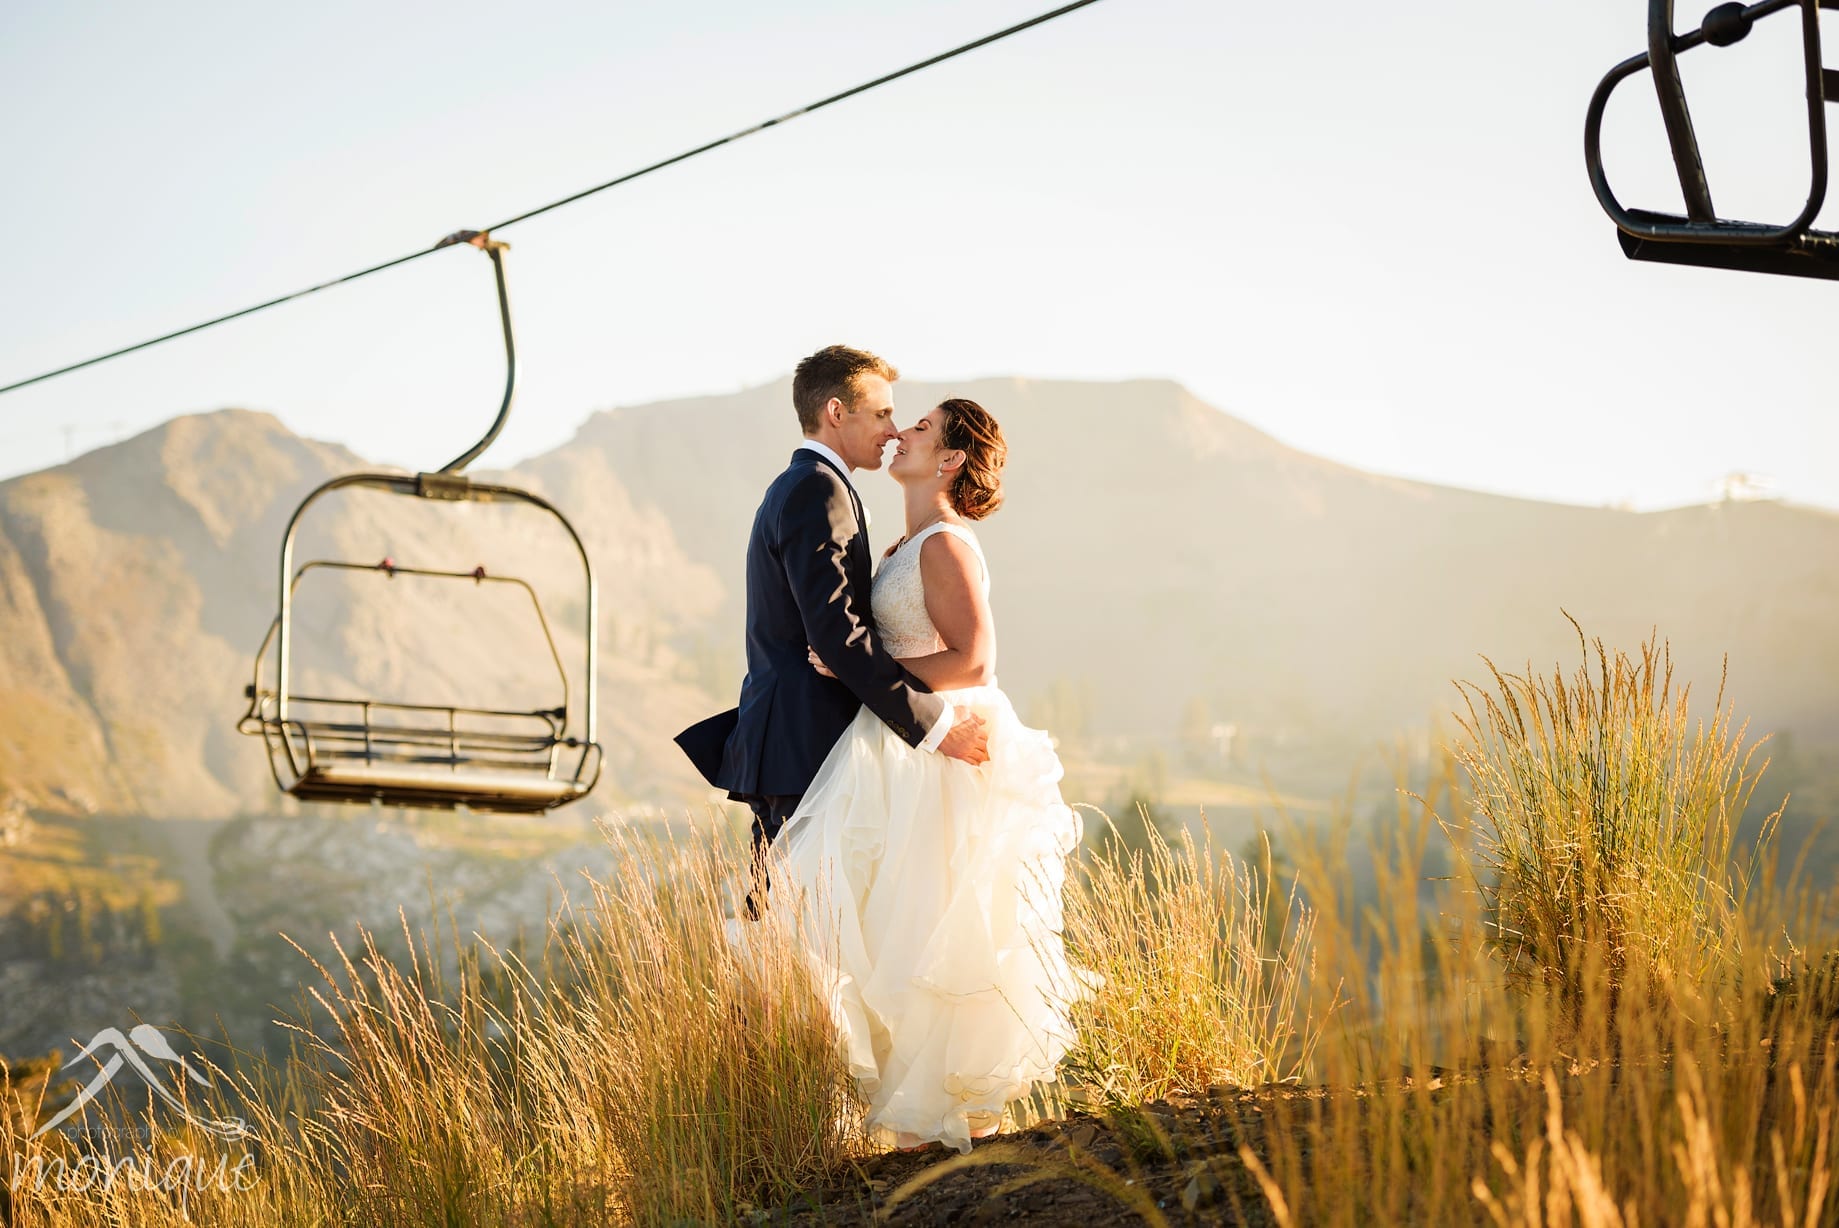 Squaw Valley High Camp wedding photography at sunset with the chair lifts the Palisades in the background by local photographers Photography by Monique